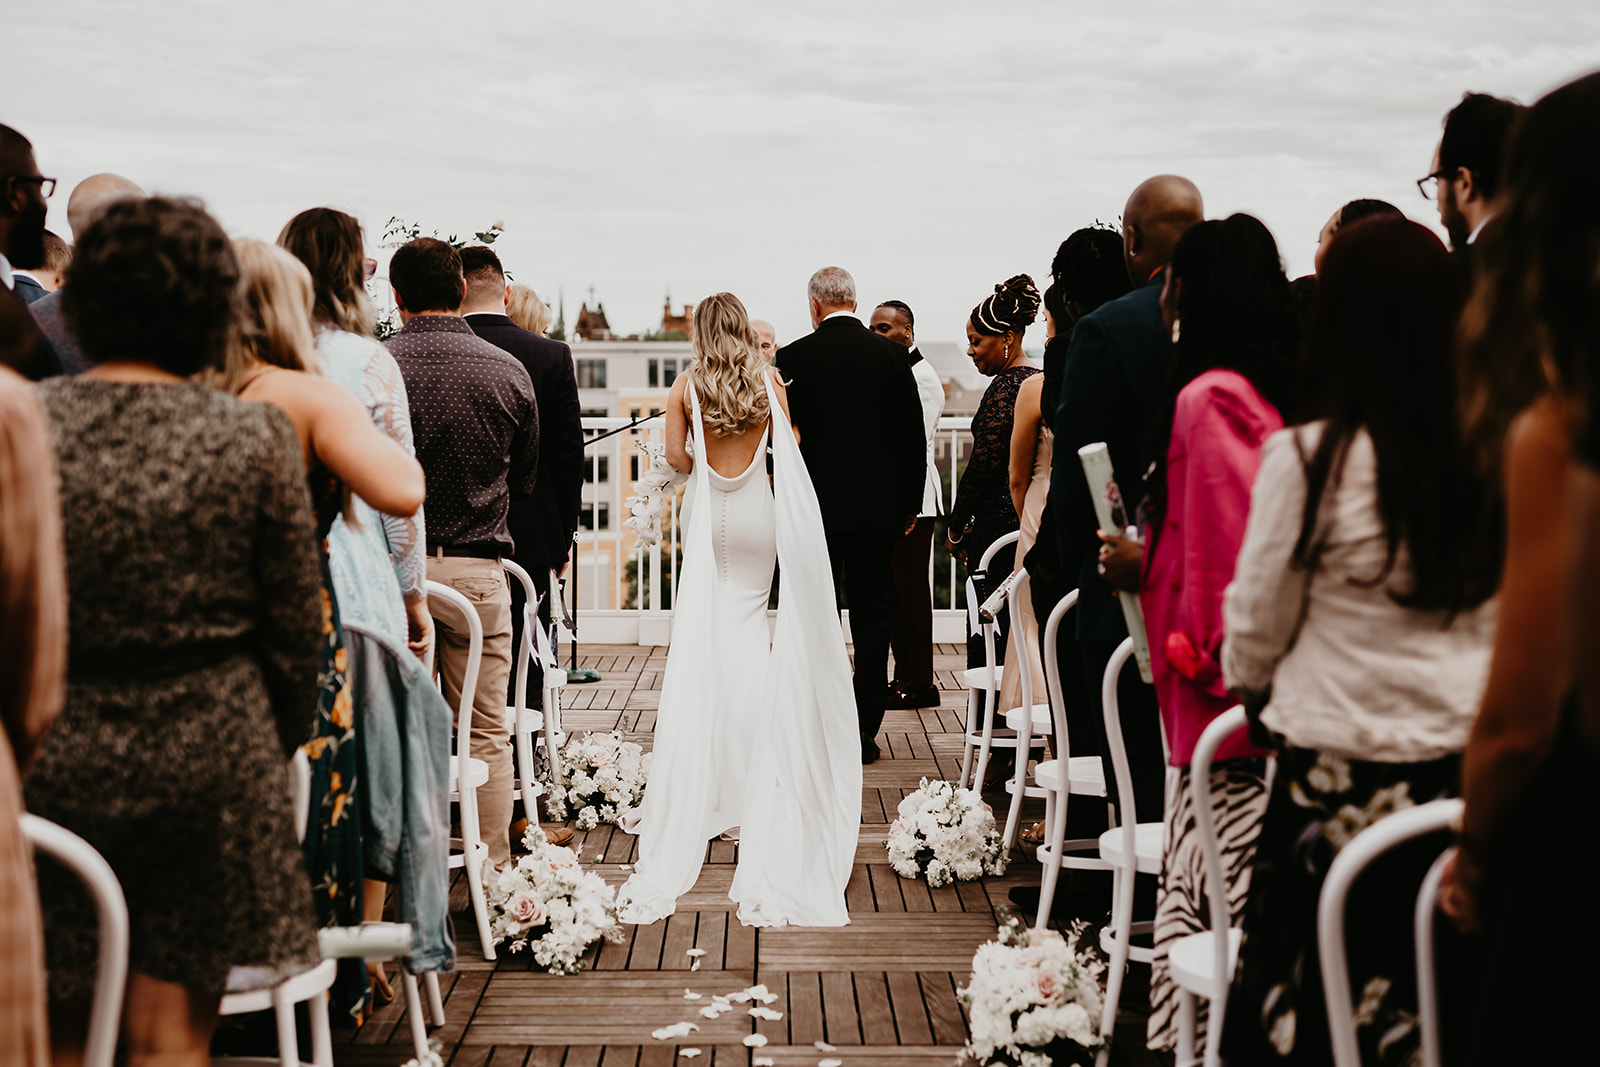 Chic rooftop wedding at The Lantern Room in Cleveland, Ohio - bride and groom exchanging vows.